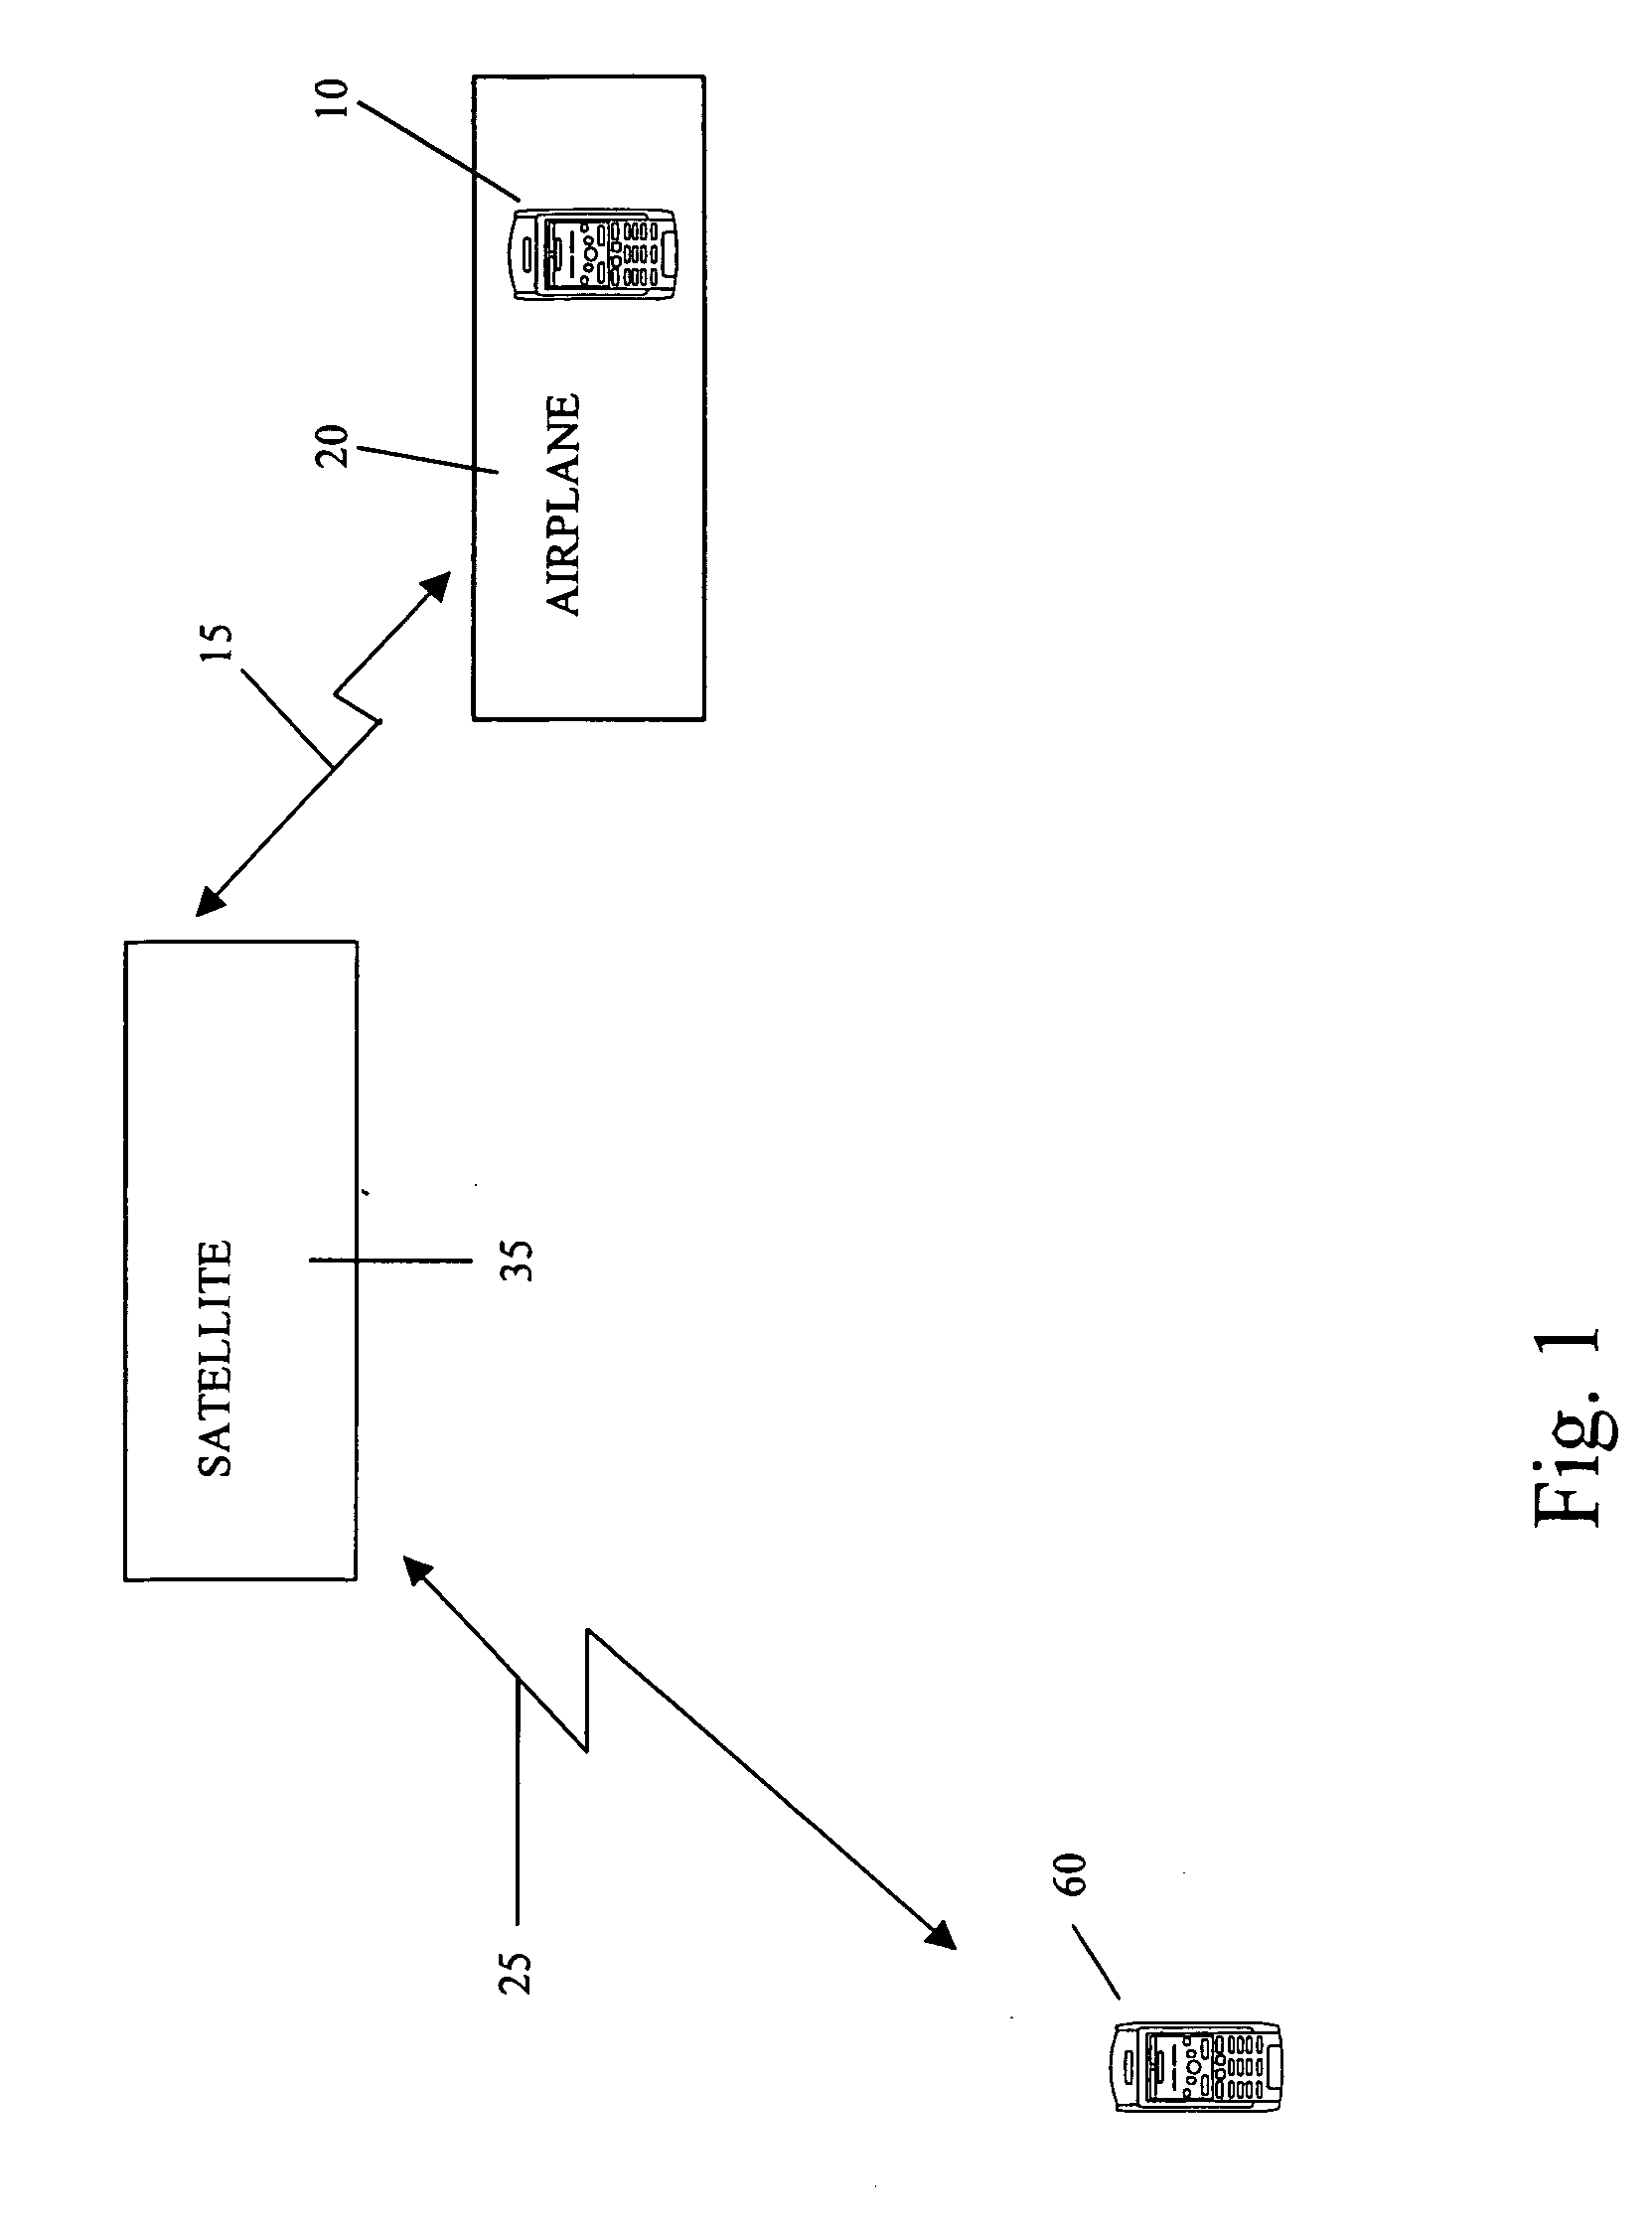 Systems and methods for wireless communications onboard aircraft